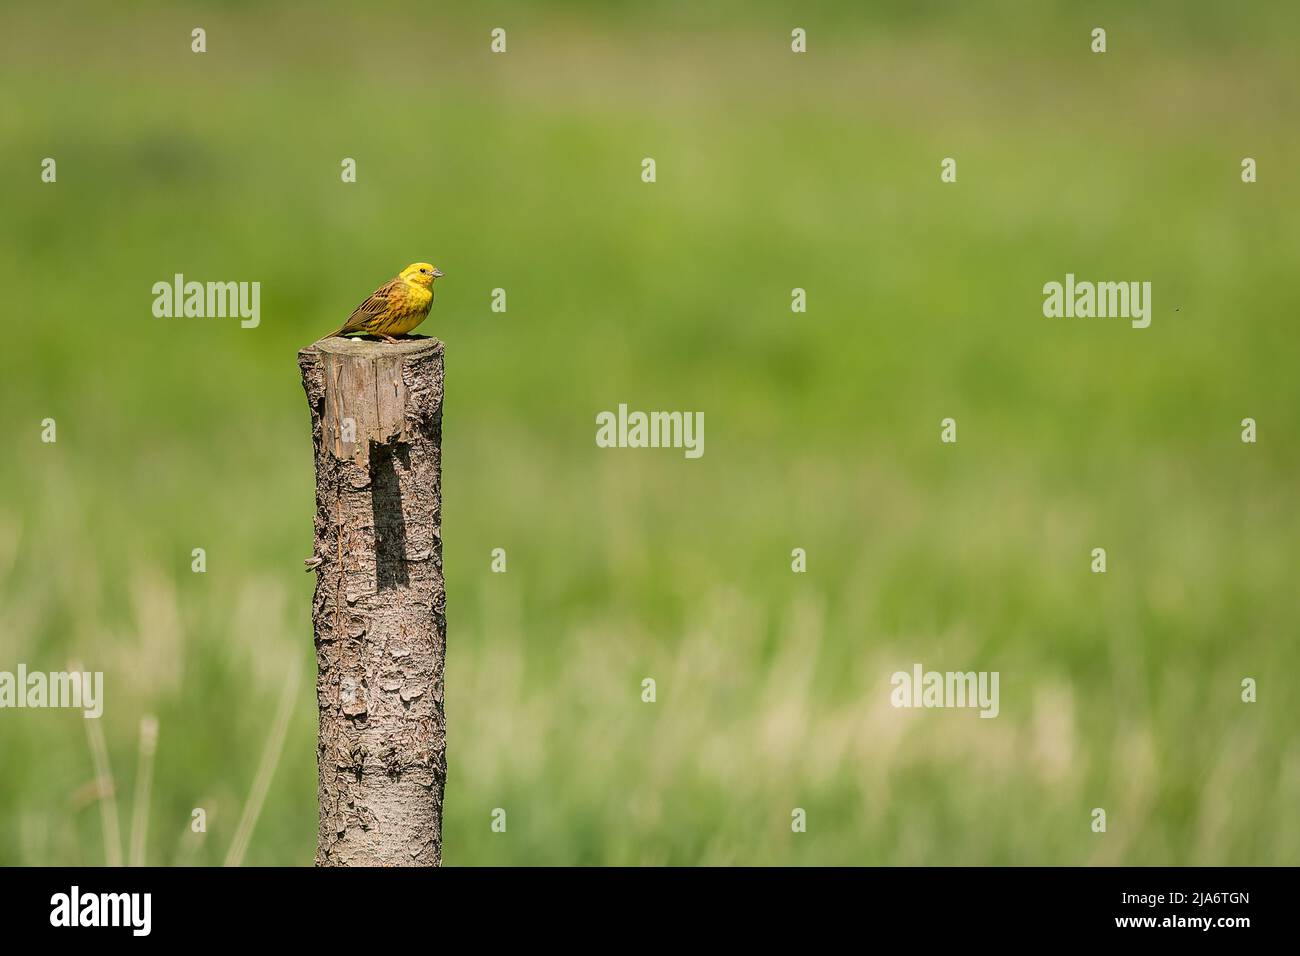 The yellowhammer, a male passerine bird, perching on a wooden pole at the pasture on a sunny spring day. Green grass in the background. Stock Photo